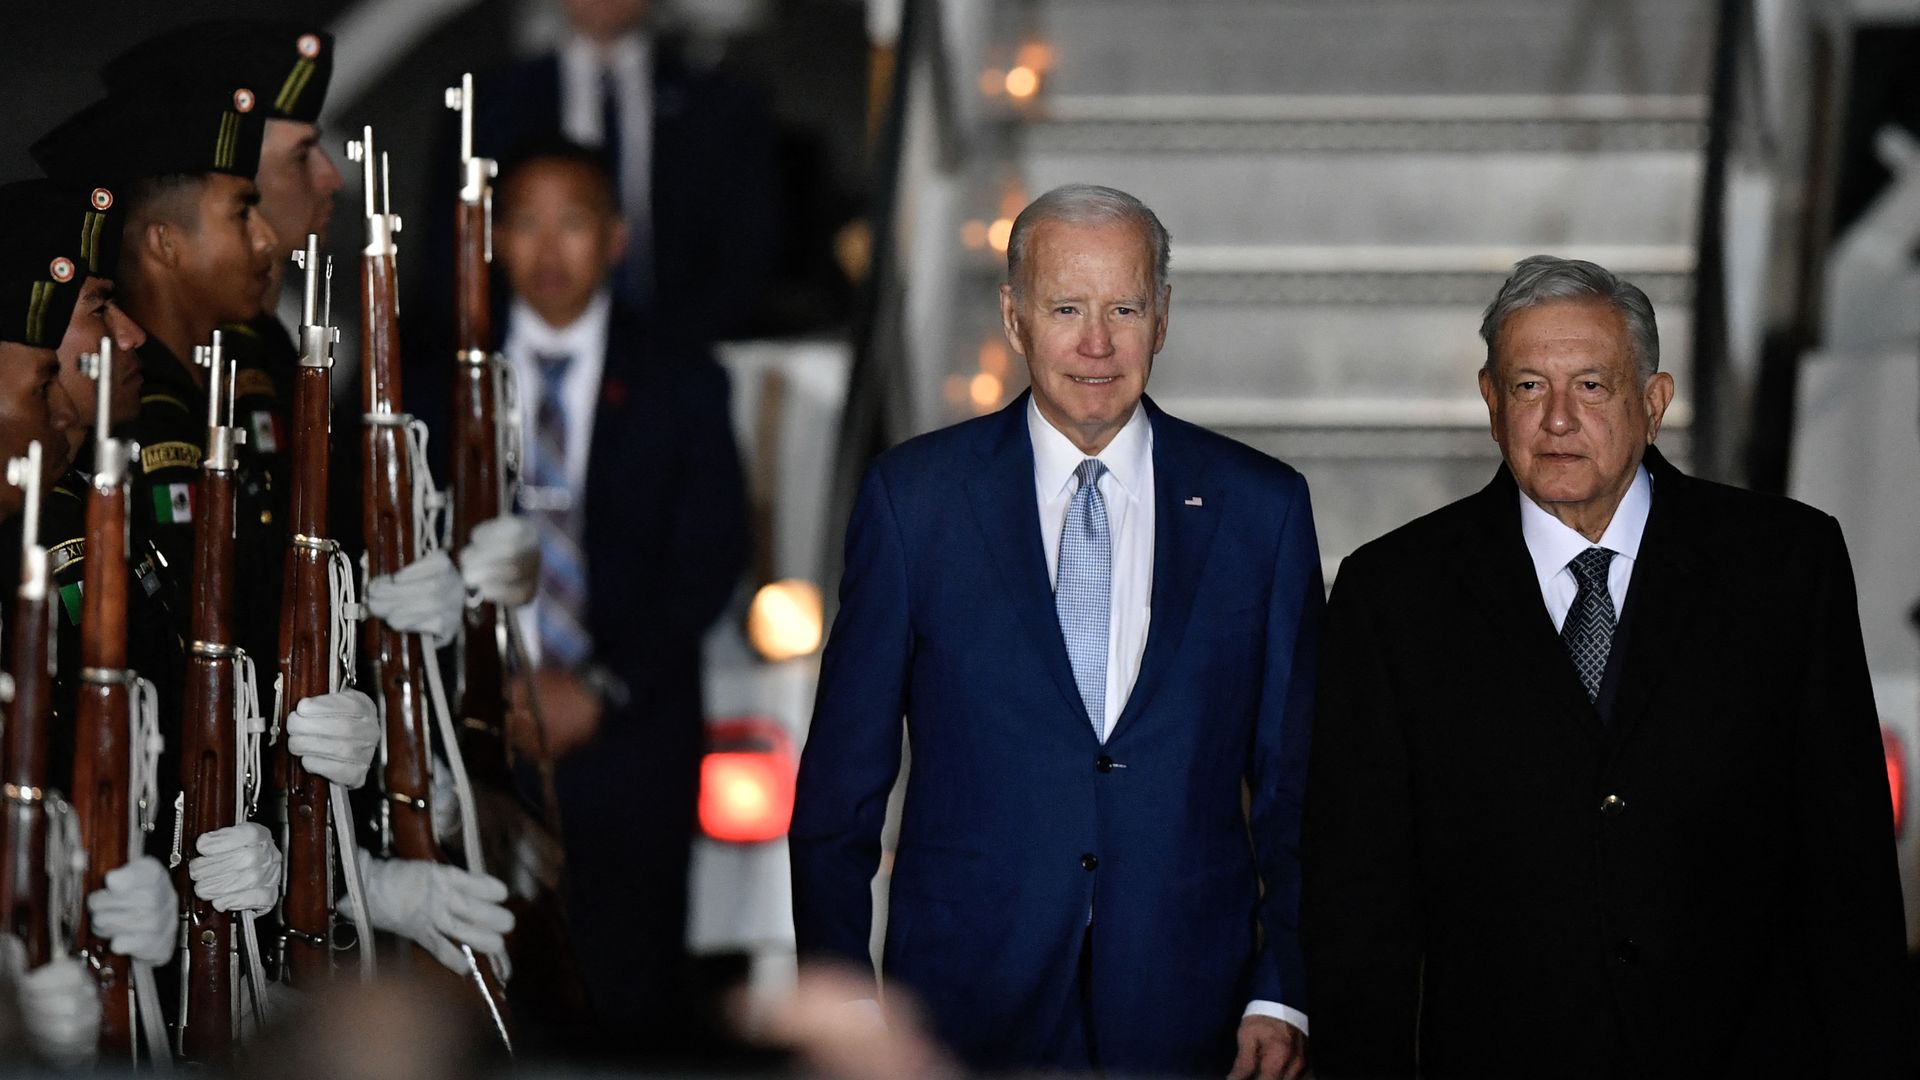 Photo of Joe Biden and Andres Manuel Lopez Obrador standing shoulder to shoulder next to a row of soldiers